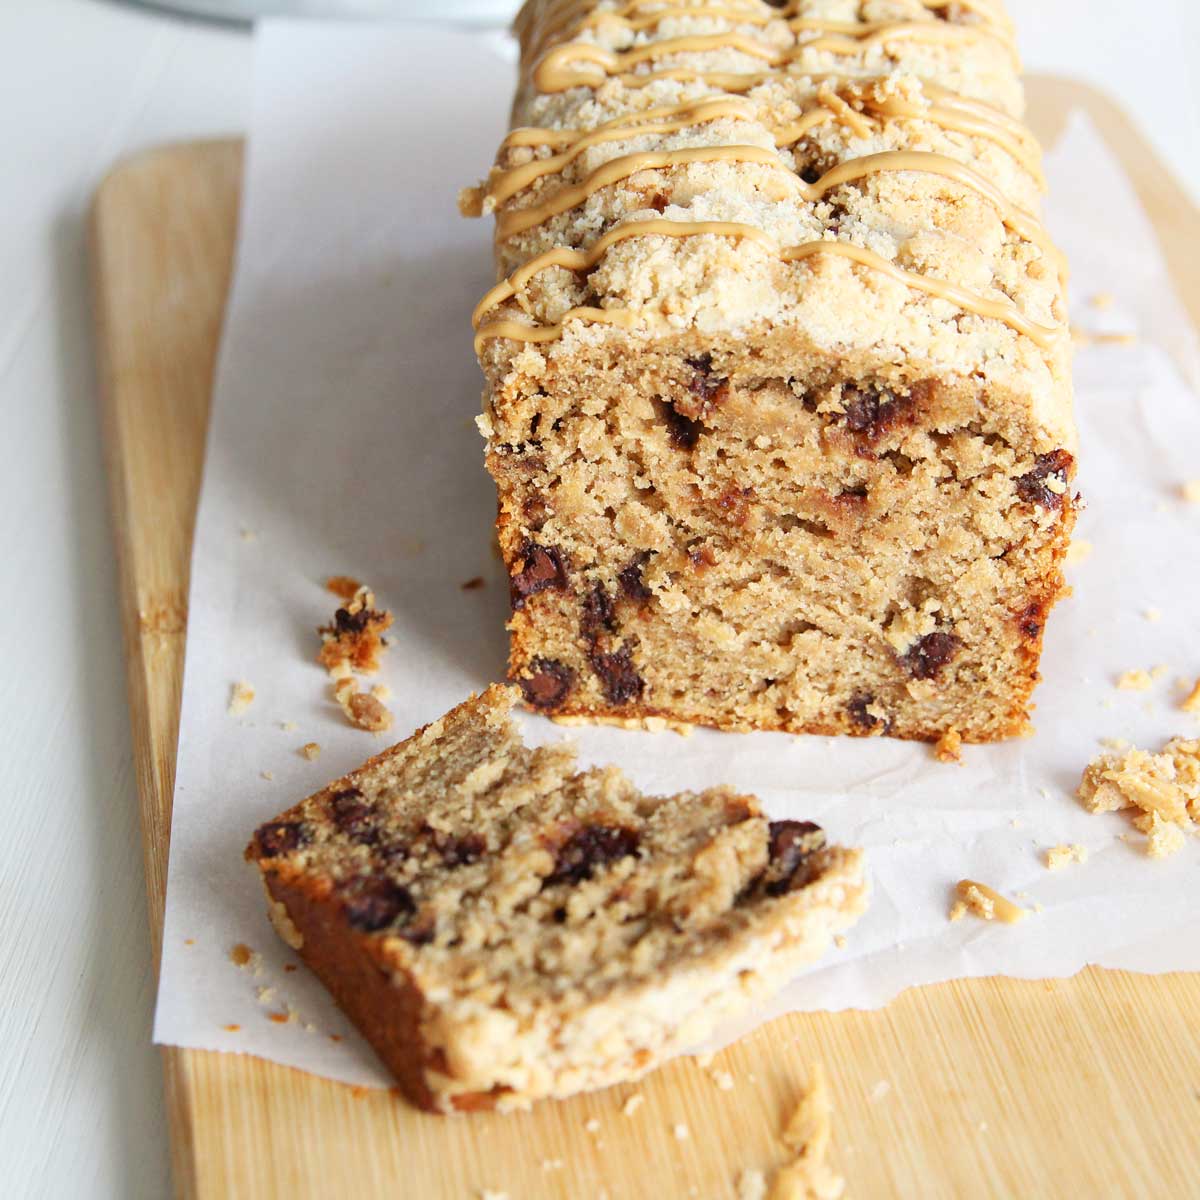 Coffee Lover's Chocolate Chip Banana Bread (No Eggs, Butter, or Dairy) - Red Bean Mochi Cake